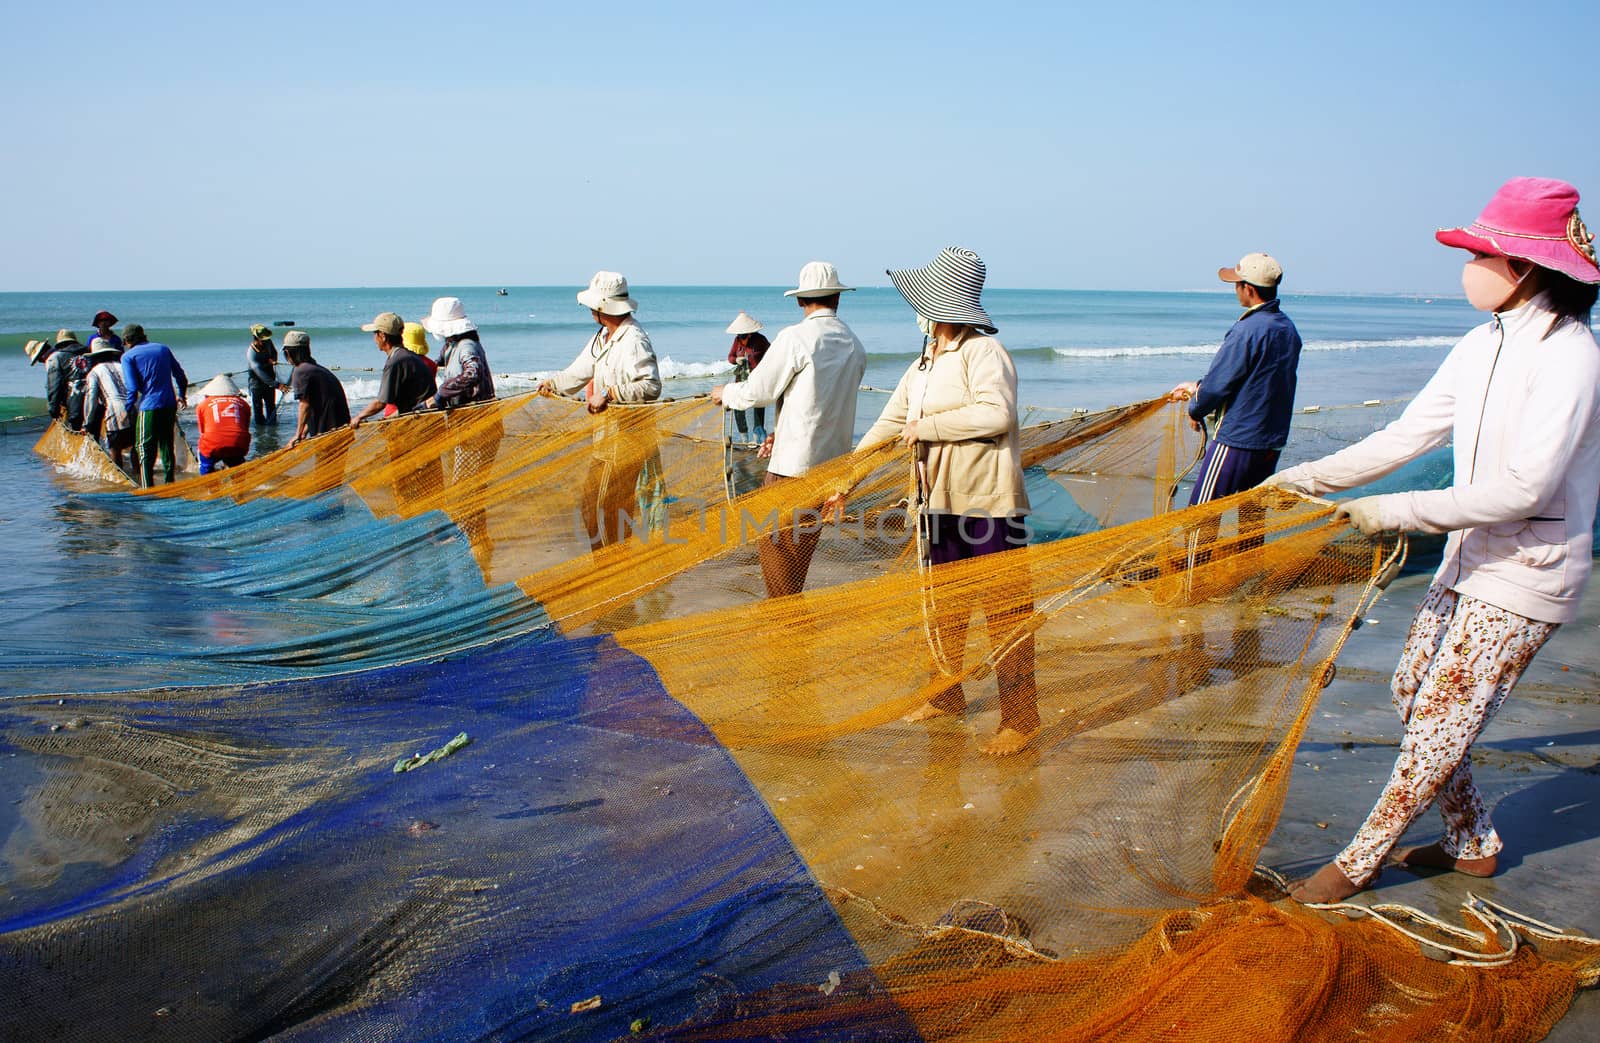 BINH THUAN, VIETNAM- JAN 22: Crowded atmosphere on beach with impression 's group of fisherman pull fish net, row of people with long net in hand, Viet Nam, Jan 22, 2014                            